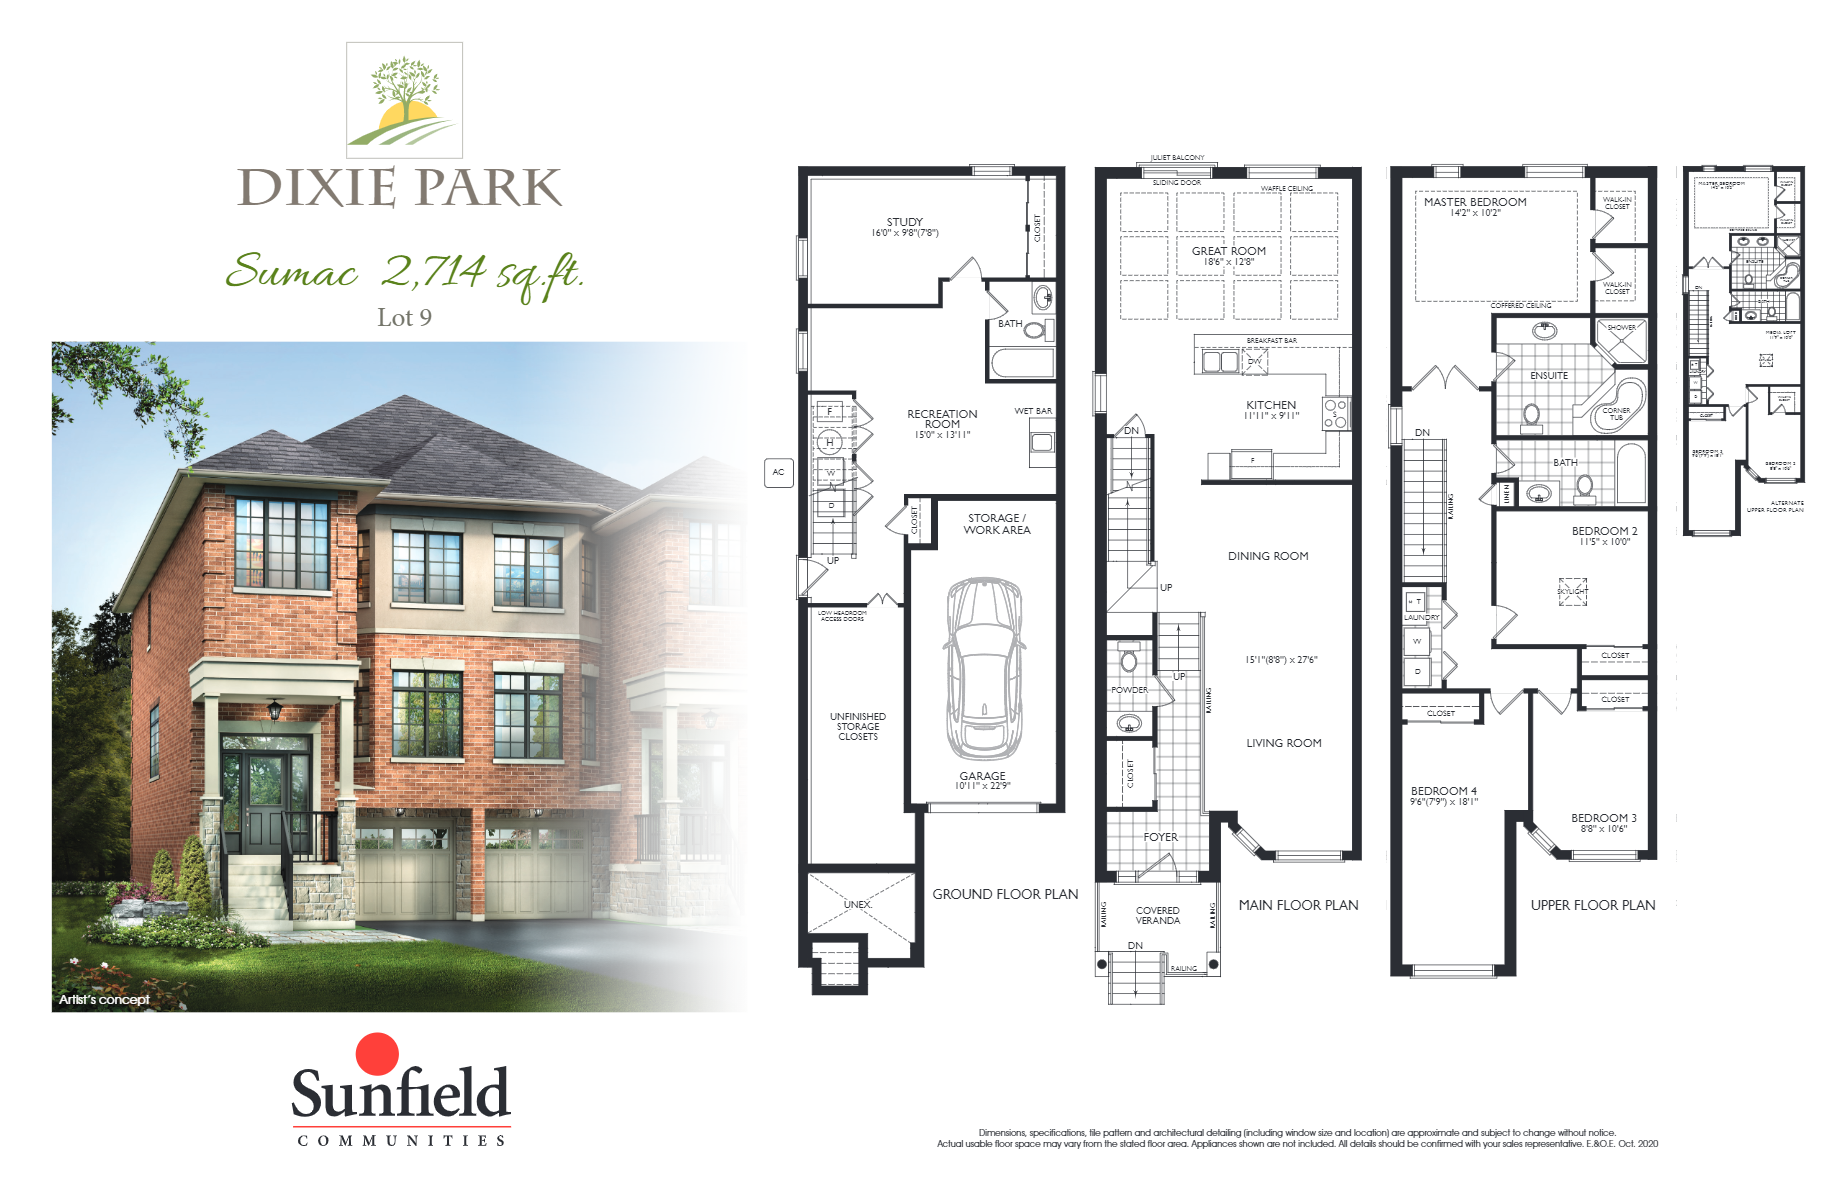  Floor Plan of Dixie Park with undefined beds